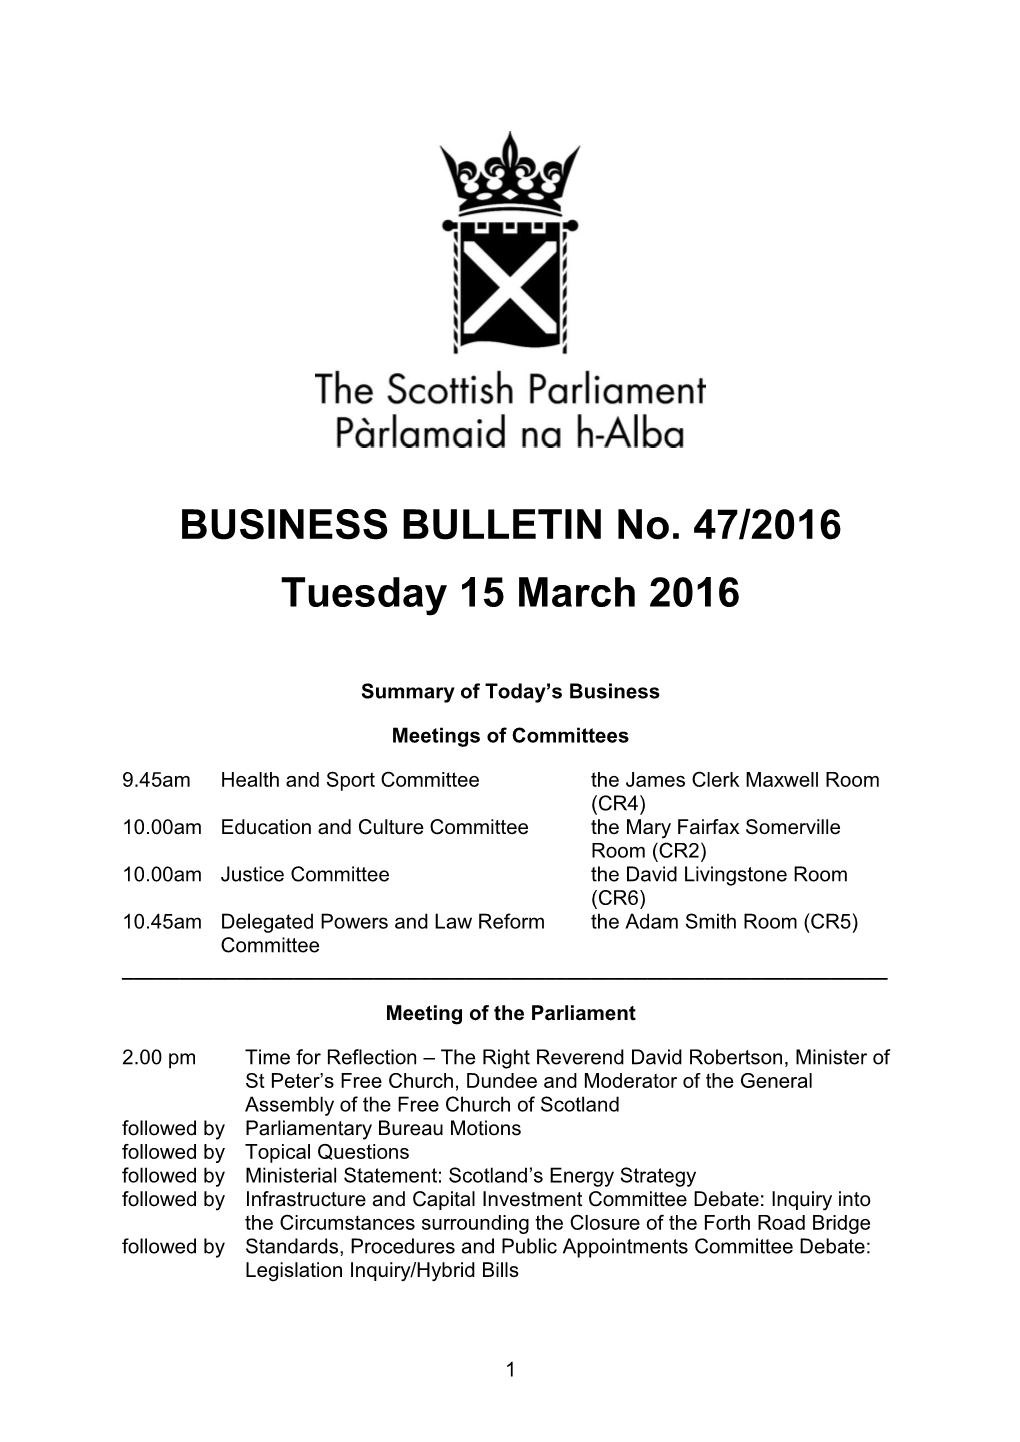 BUSINESS BULLETIN No. 47/2016 Tuesday 15 March 2016